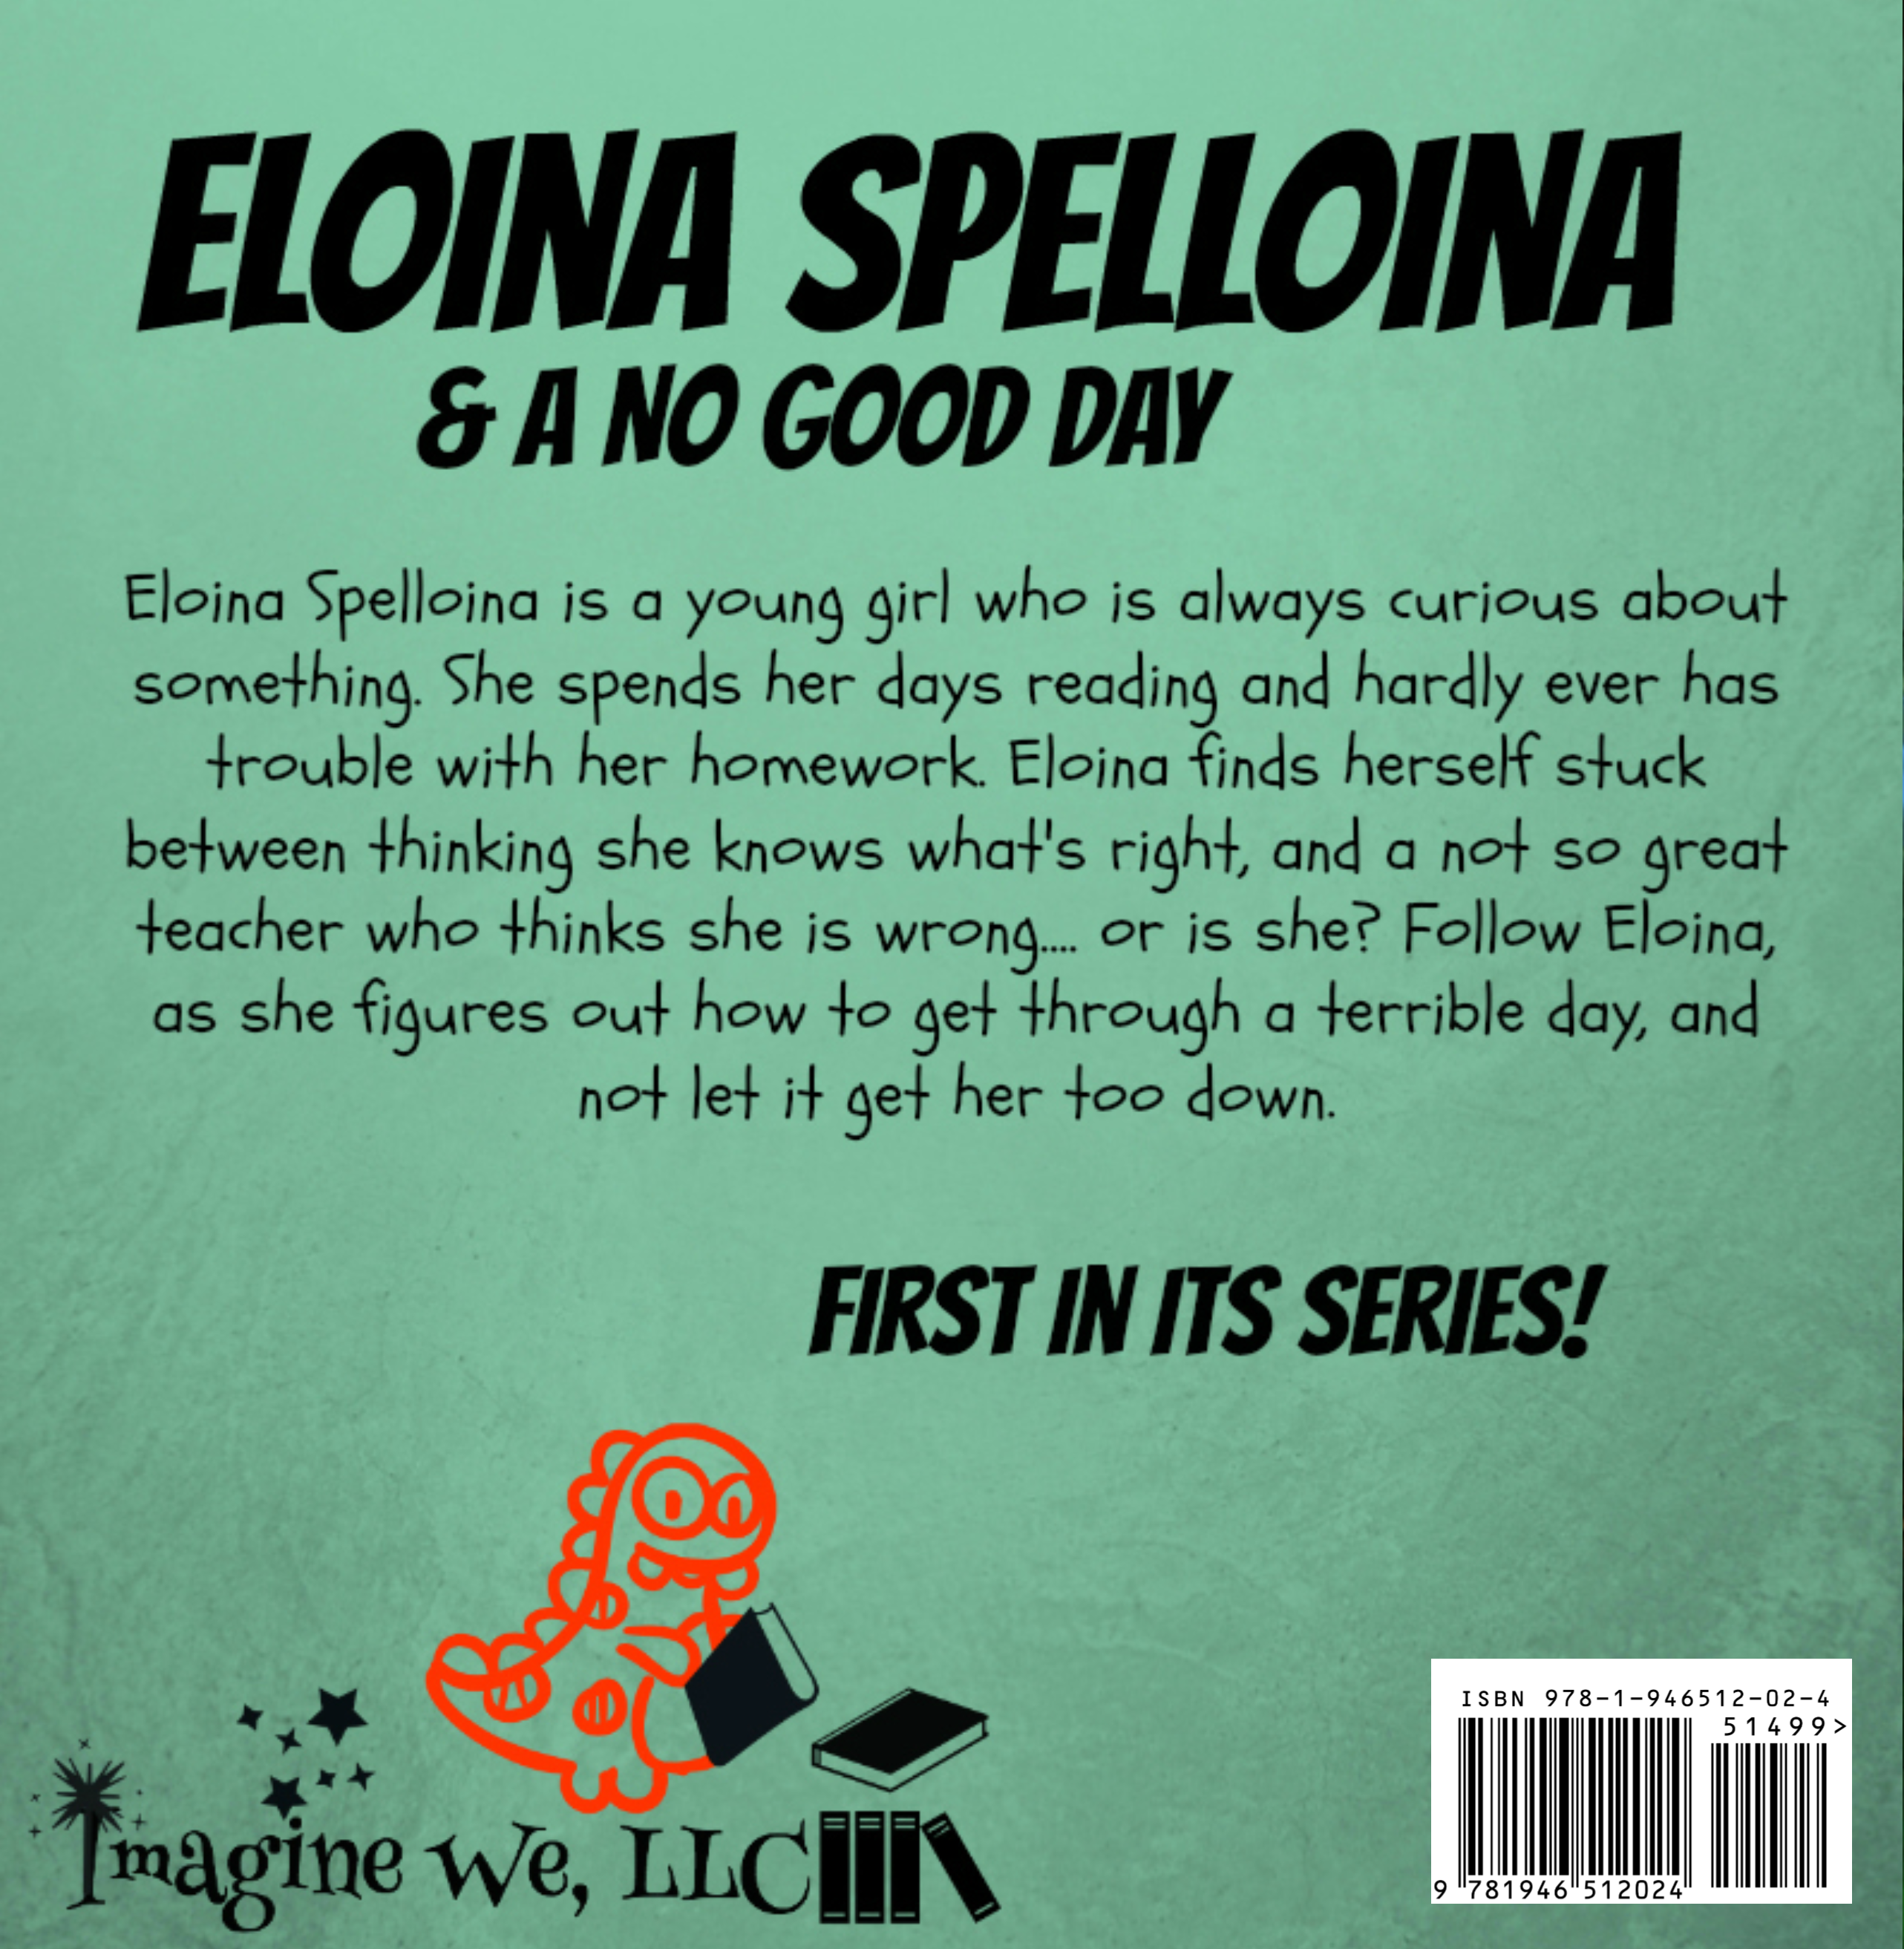 Eloina Spelloina and a No Good Day - 2nd EDITION COMING SOON - ImagineWe Publishers